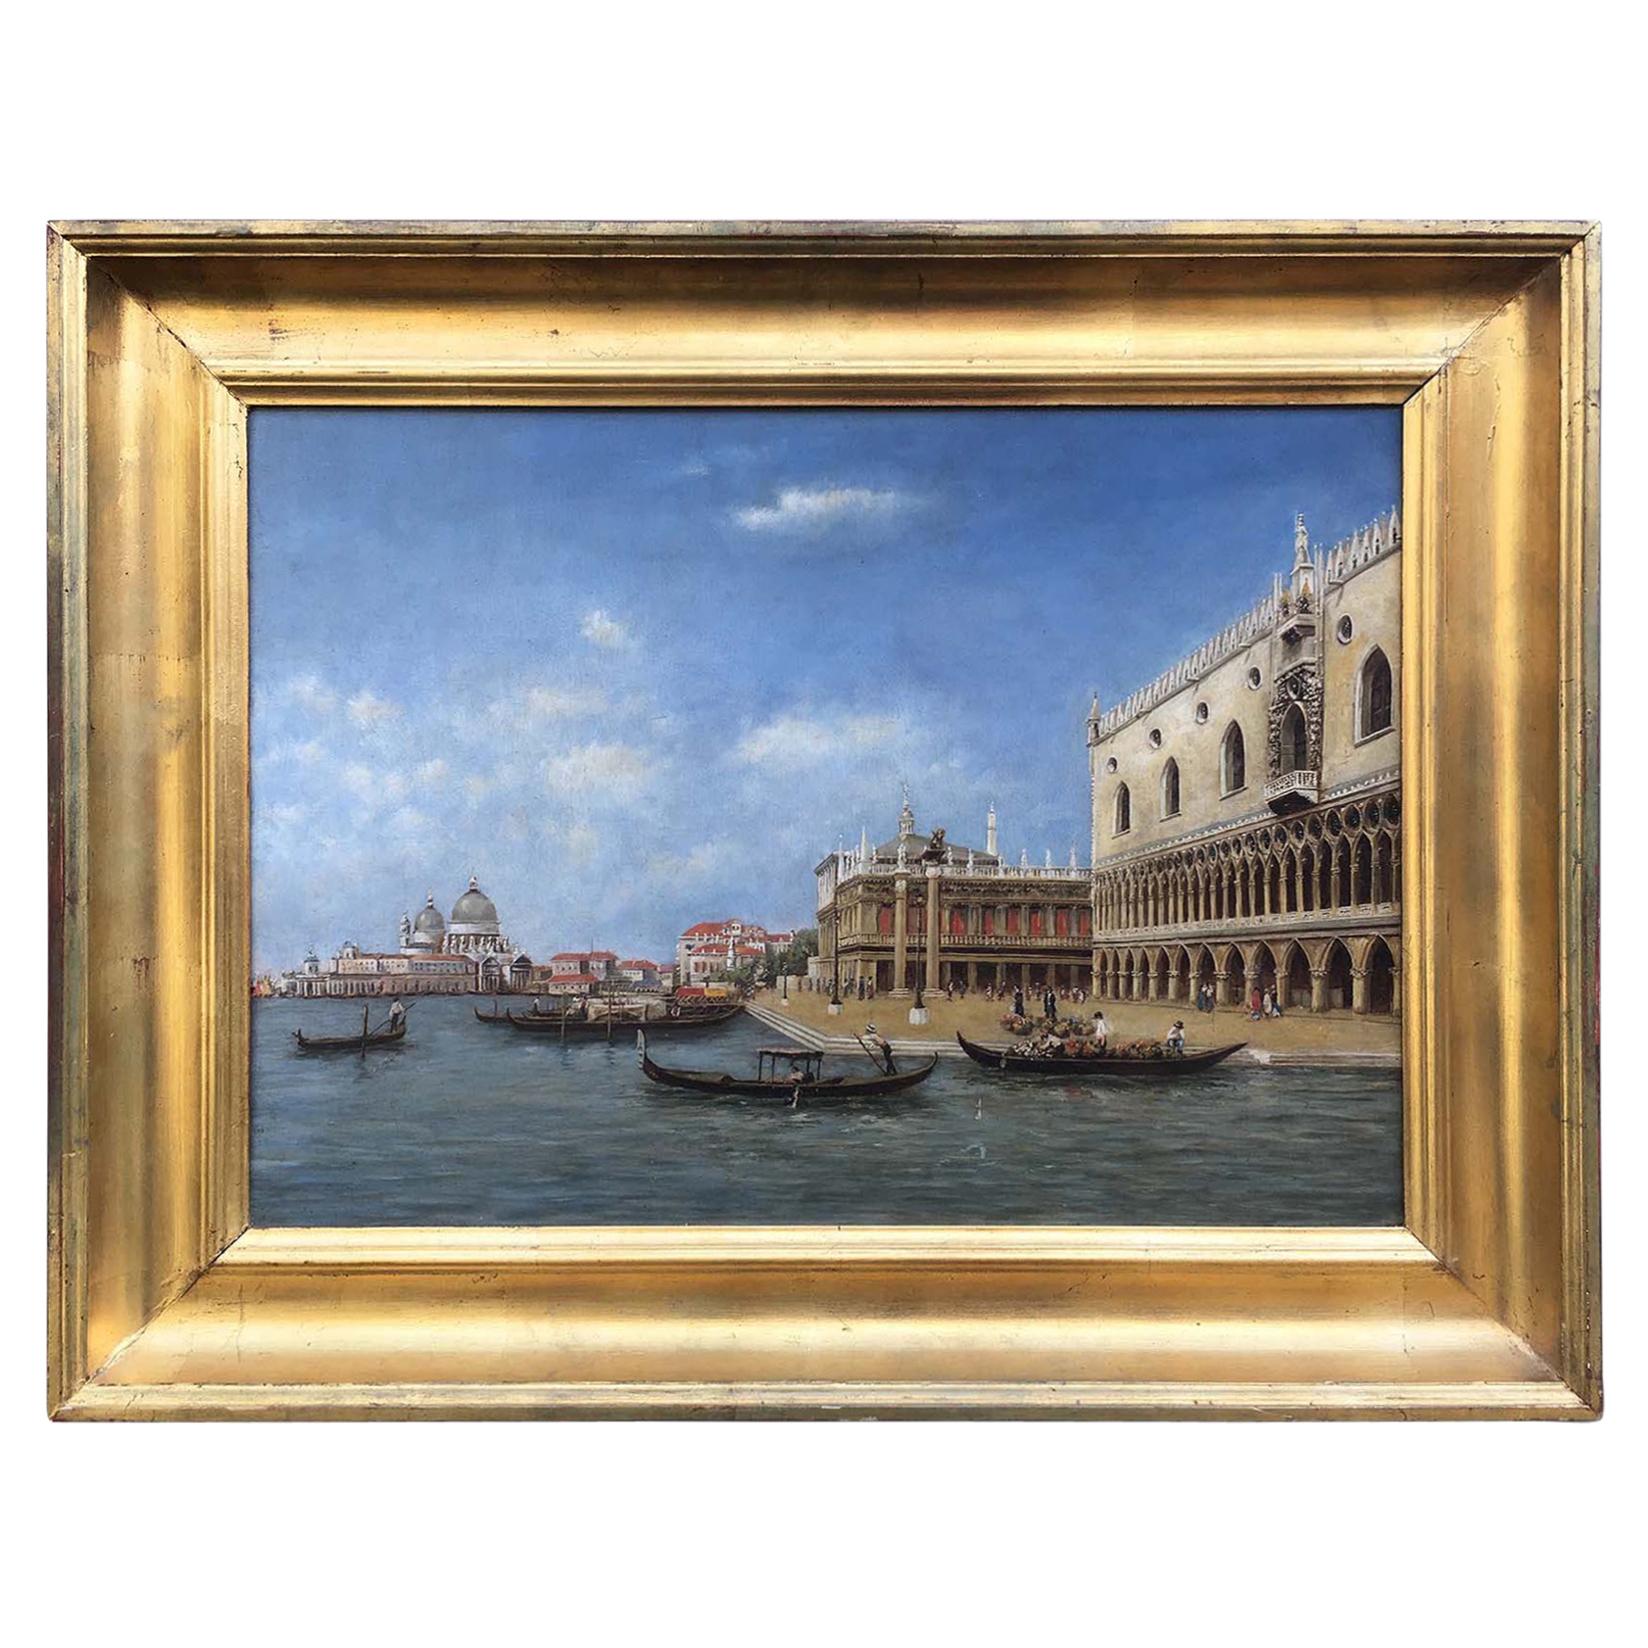 Venice Scene 19th Century Oil on Canvas, Attributed to Kaufman